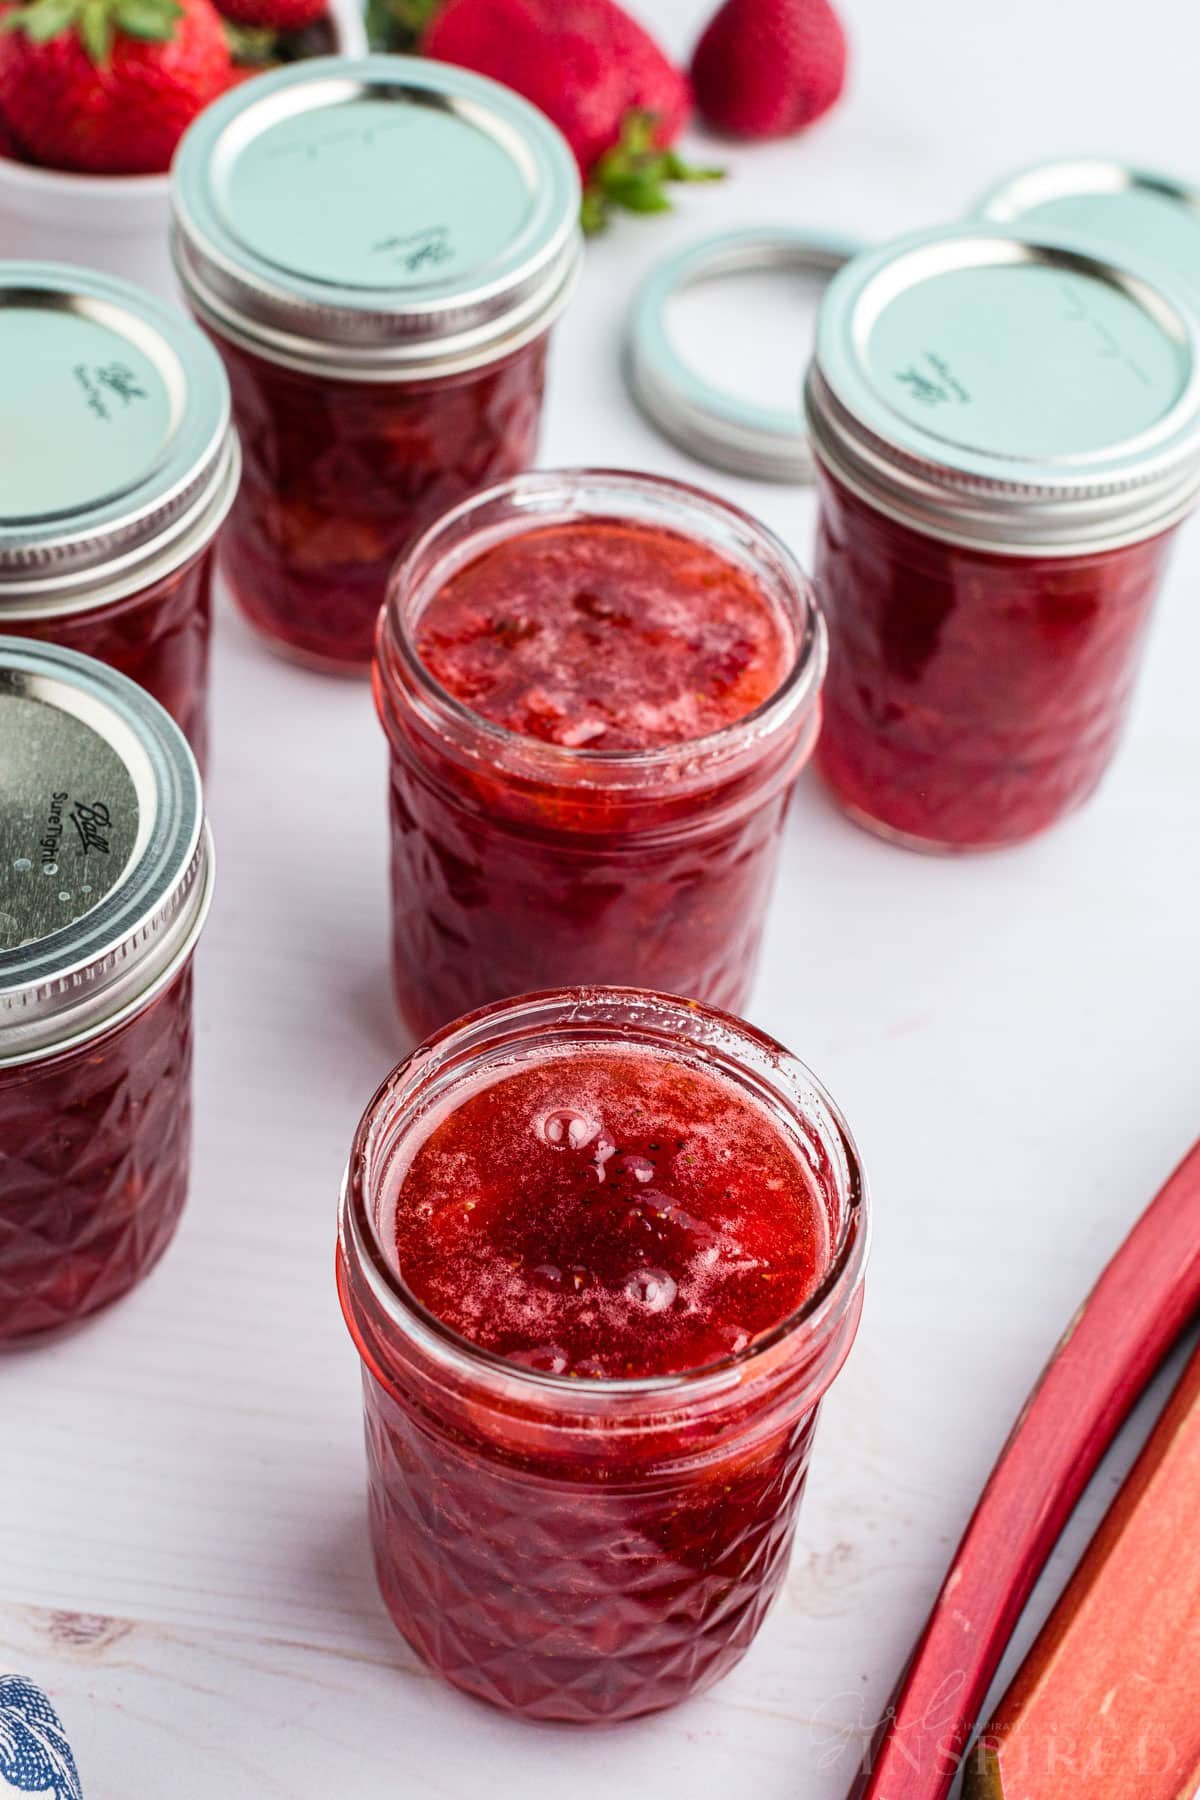 Several canning jars filled with strawberry rhubarb jam.